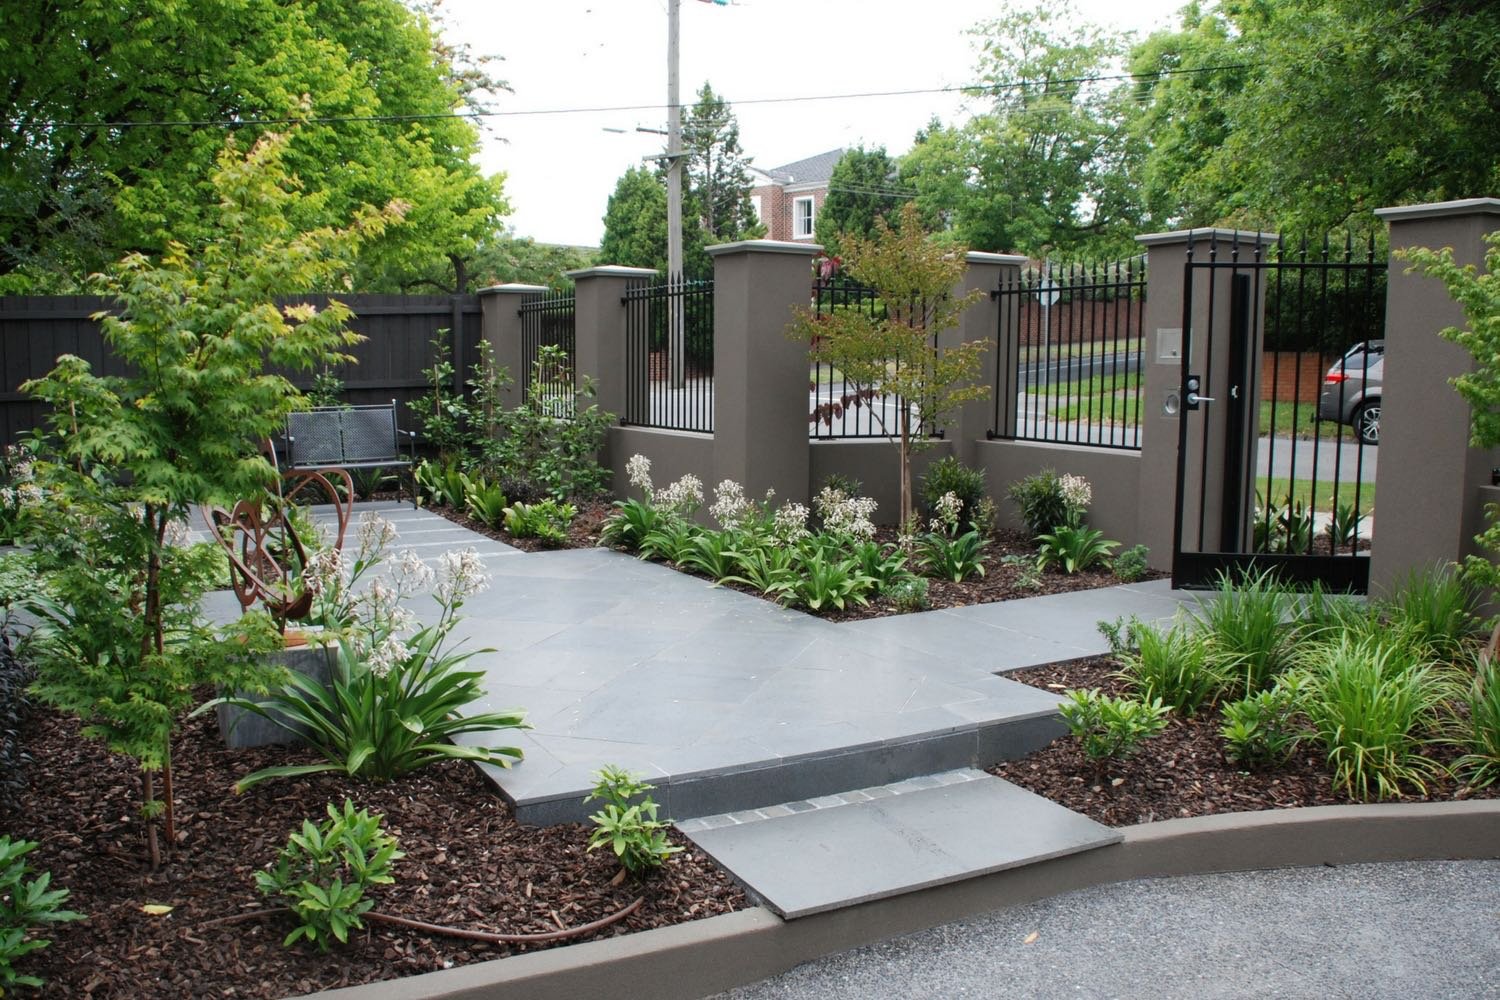 Optional Elements for Landscaping